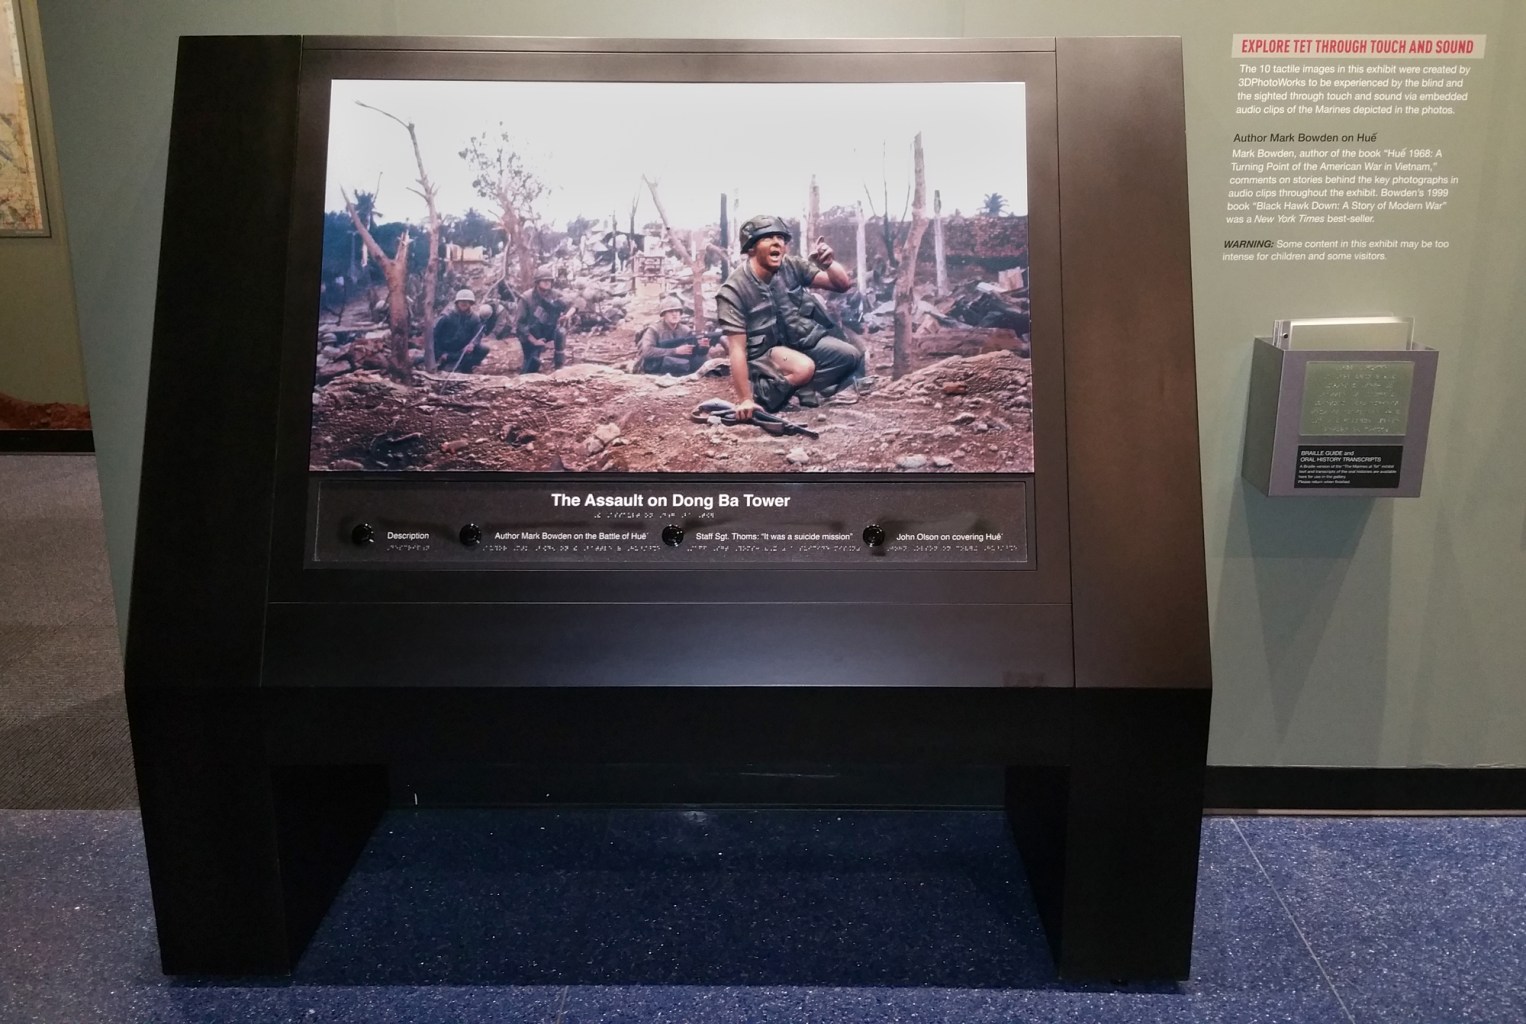 A tactile print shows armed soldiers crouching in a field. The text, reproduced in braille, reads "The Assault on Dong Ba Tower," with buttons that say "Author Mark Bowden on the Battle of Hue," "Staff Sgt. Thoms: 'It was a suicide mission,'" and "John Olson on covering Hue."